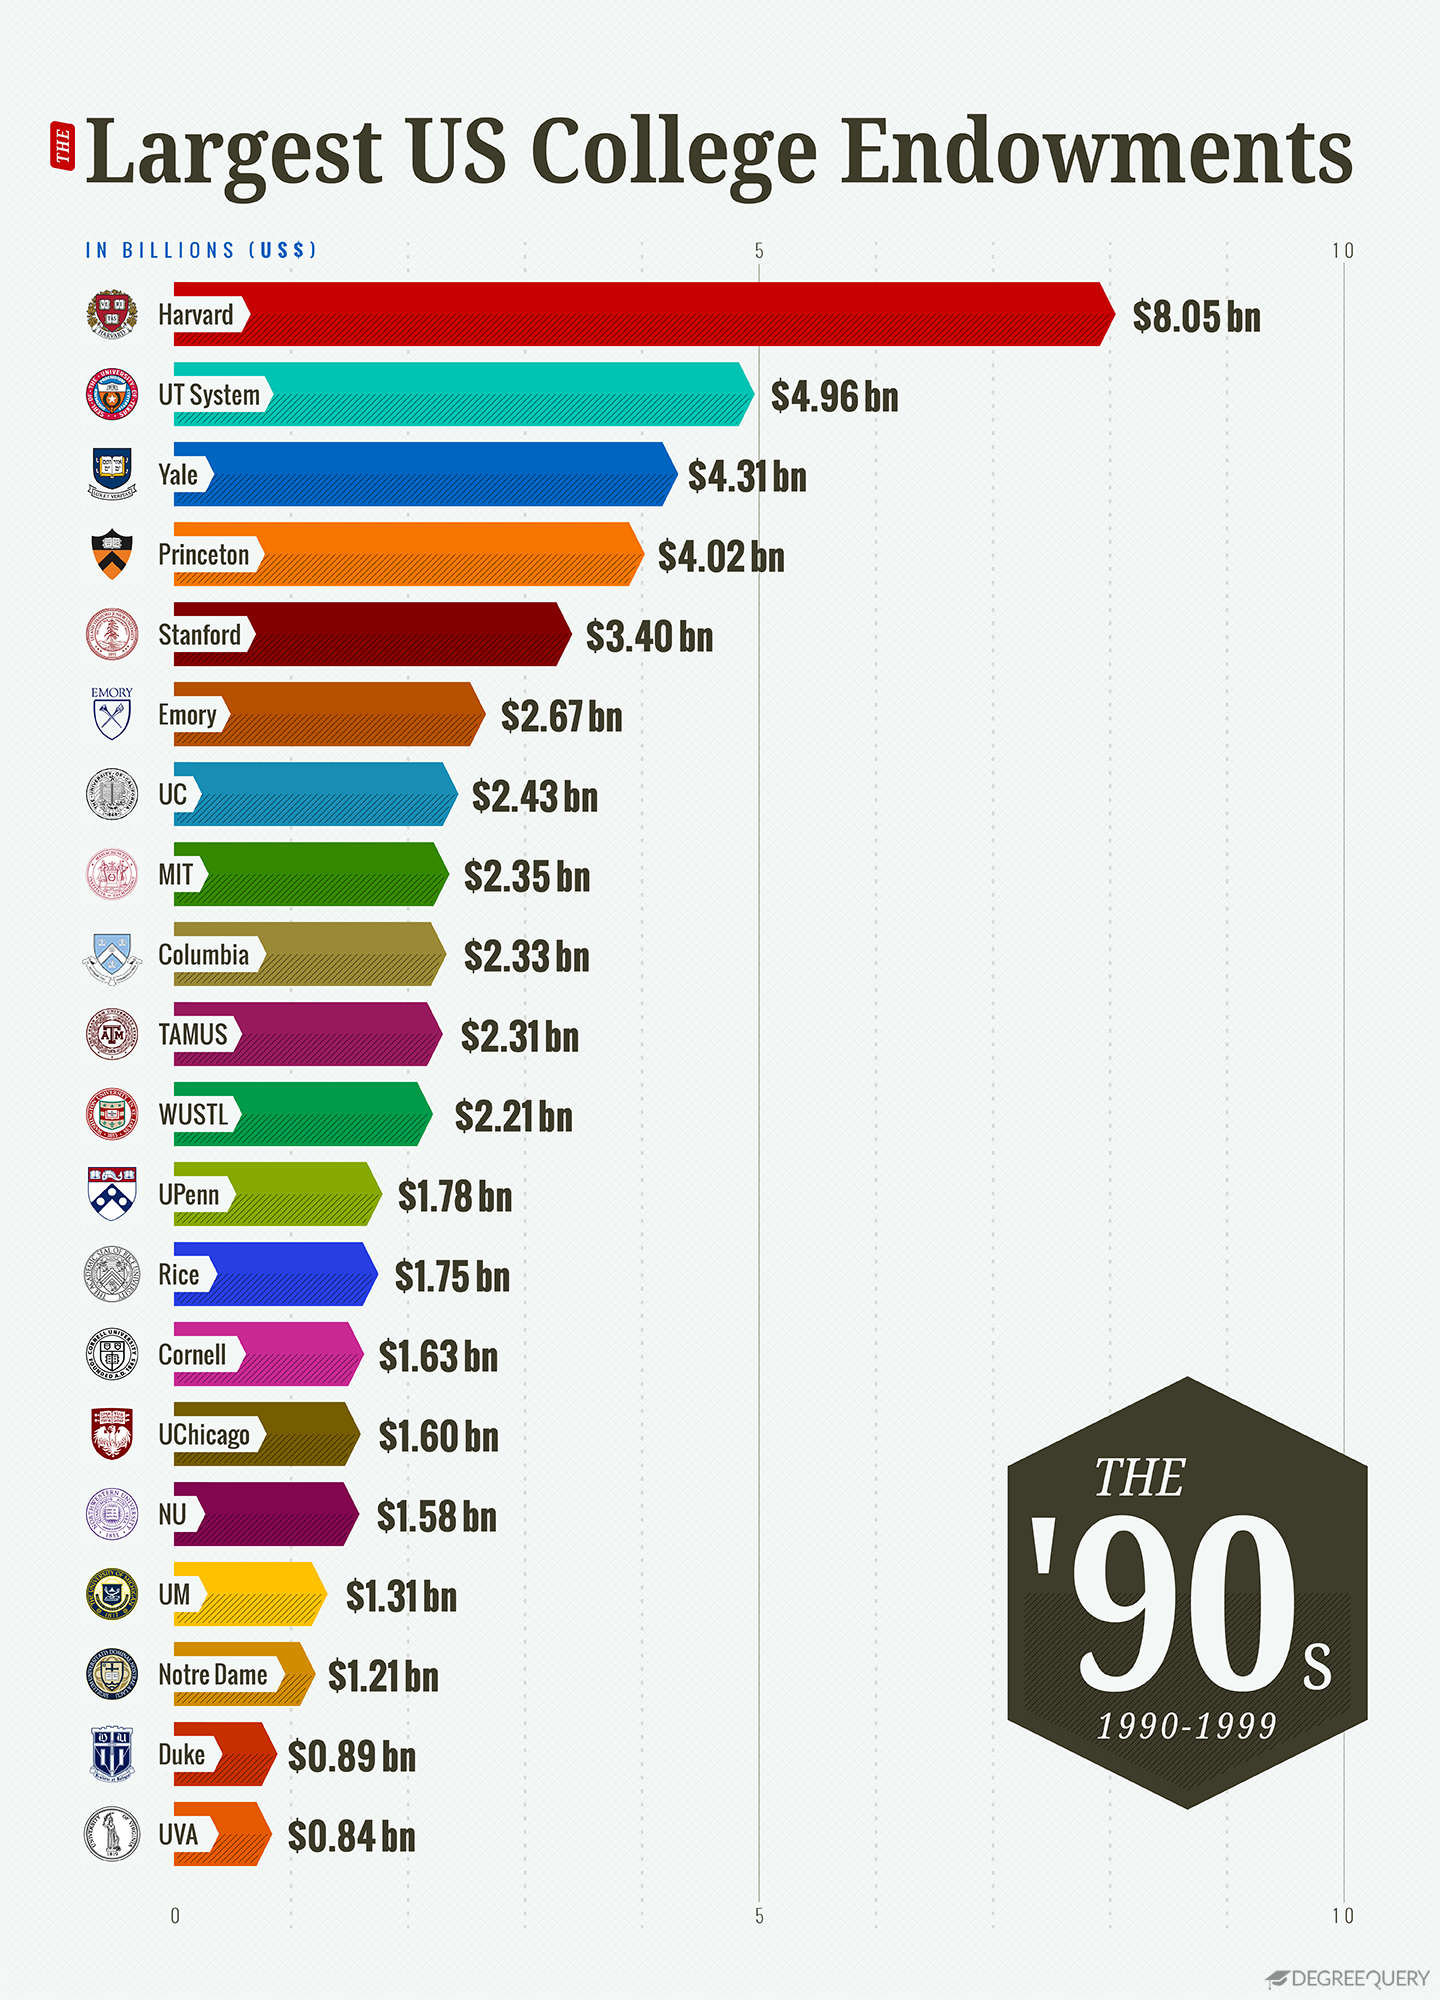 The 20 richest university endowments in the 1990s. (DegreeQuery)